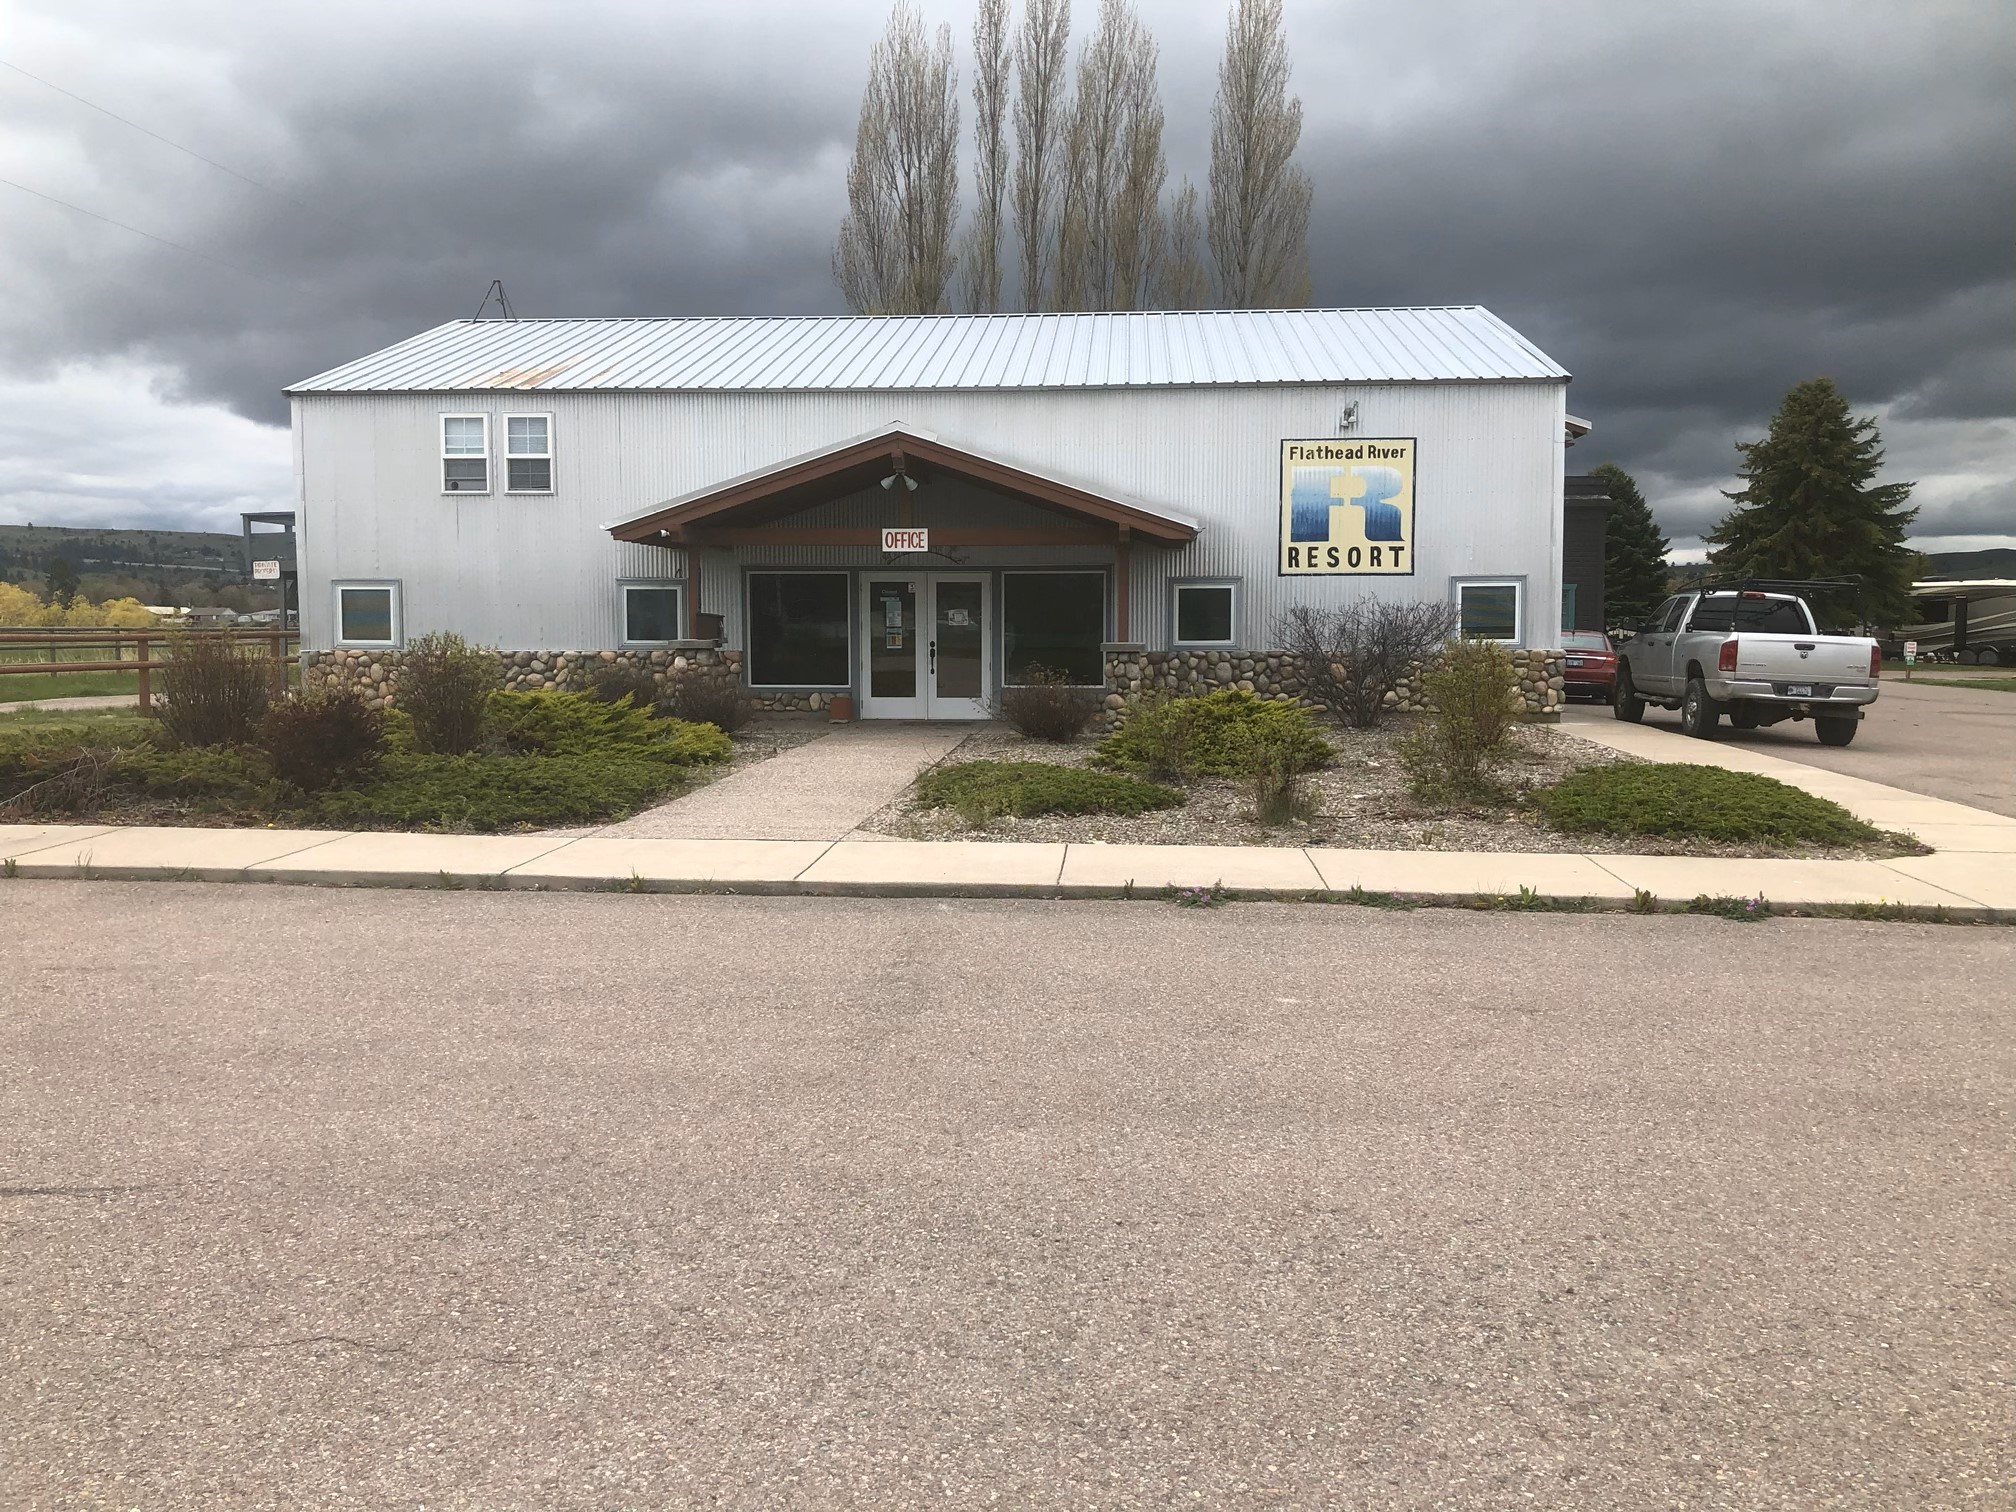 Up to 3 separate rooms are available, shared bathroom, nice private place to do business. Lots of light, building maintenance included. Call Nicole Evangeline 406-883-4313 or your real estate professional.